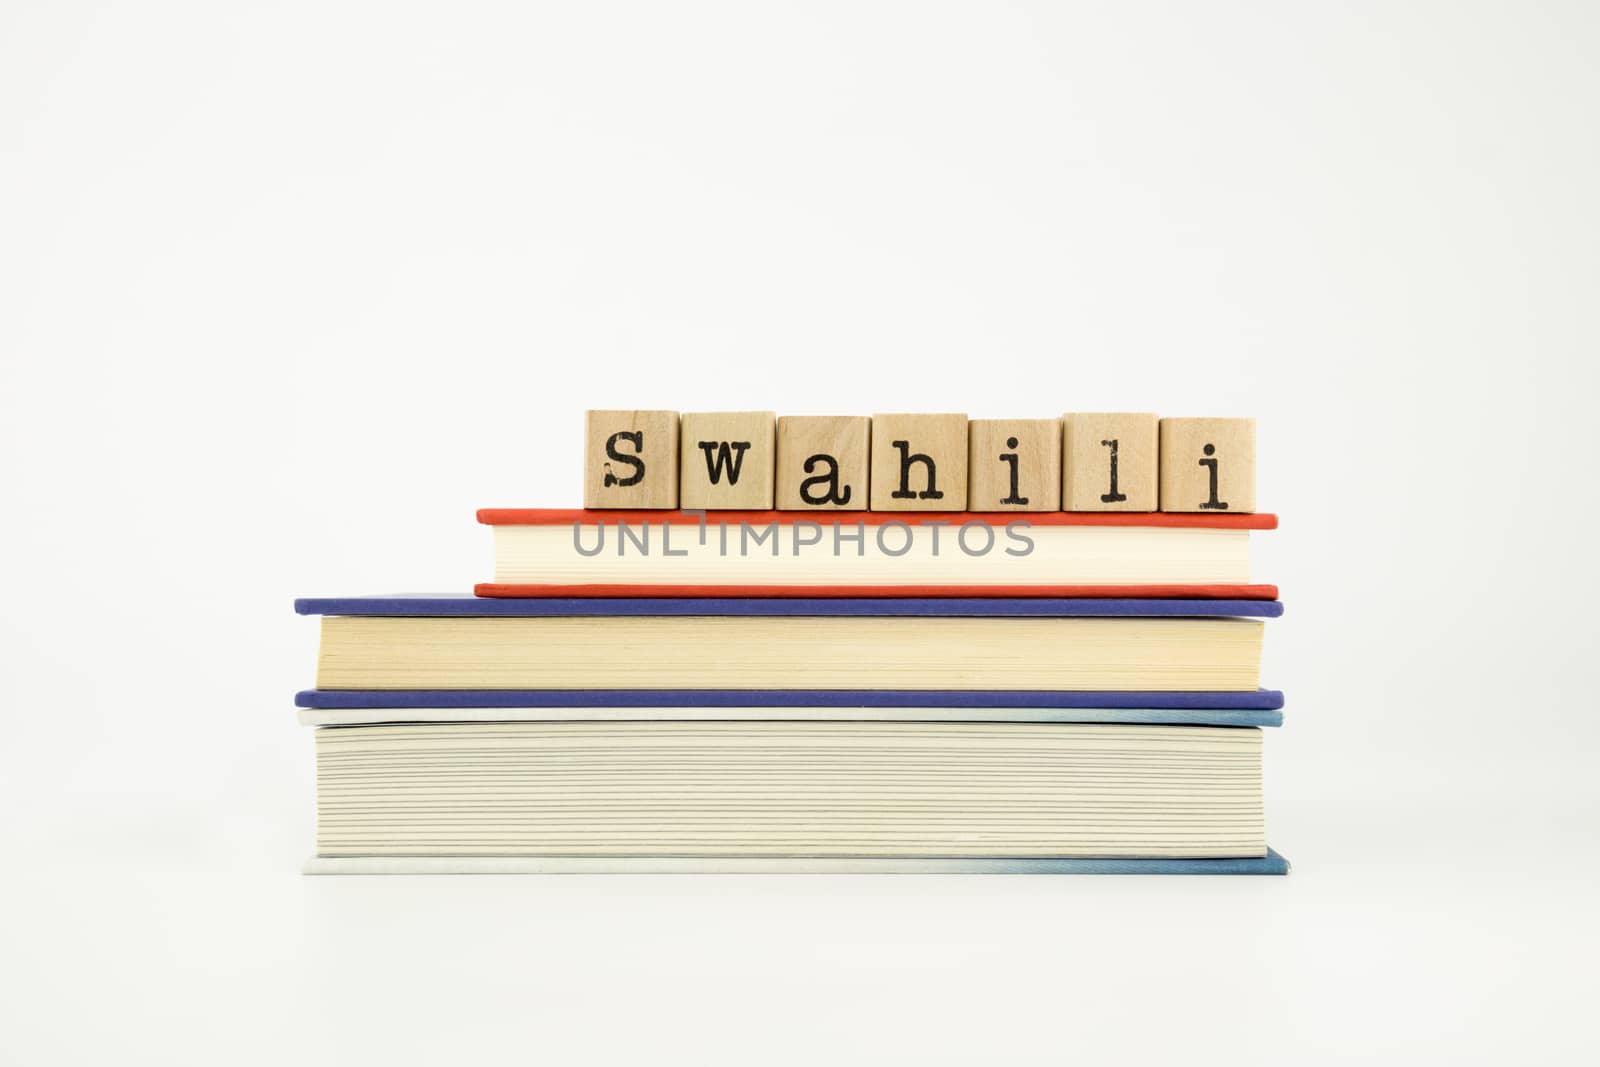 swahili language word on wood stamps and books by vinnstock